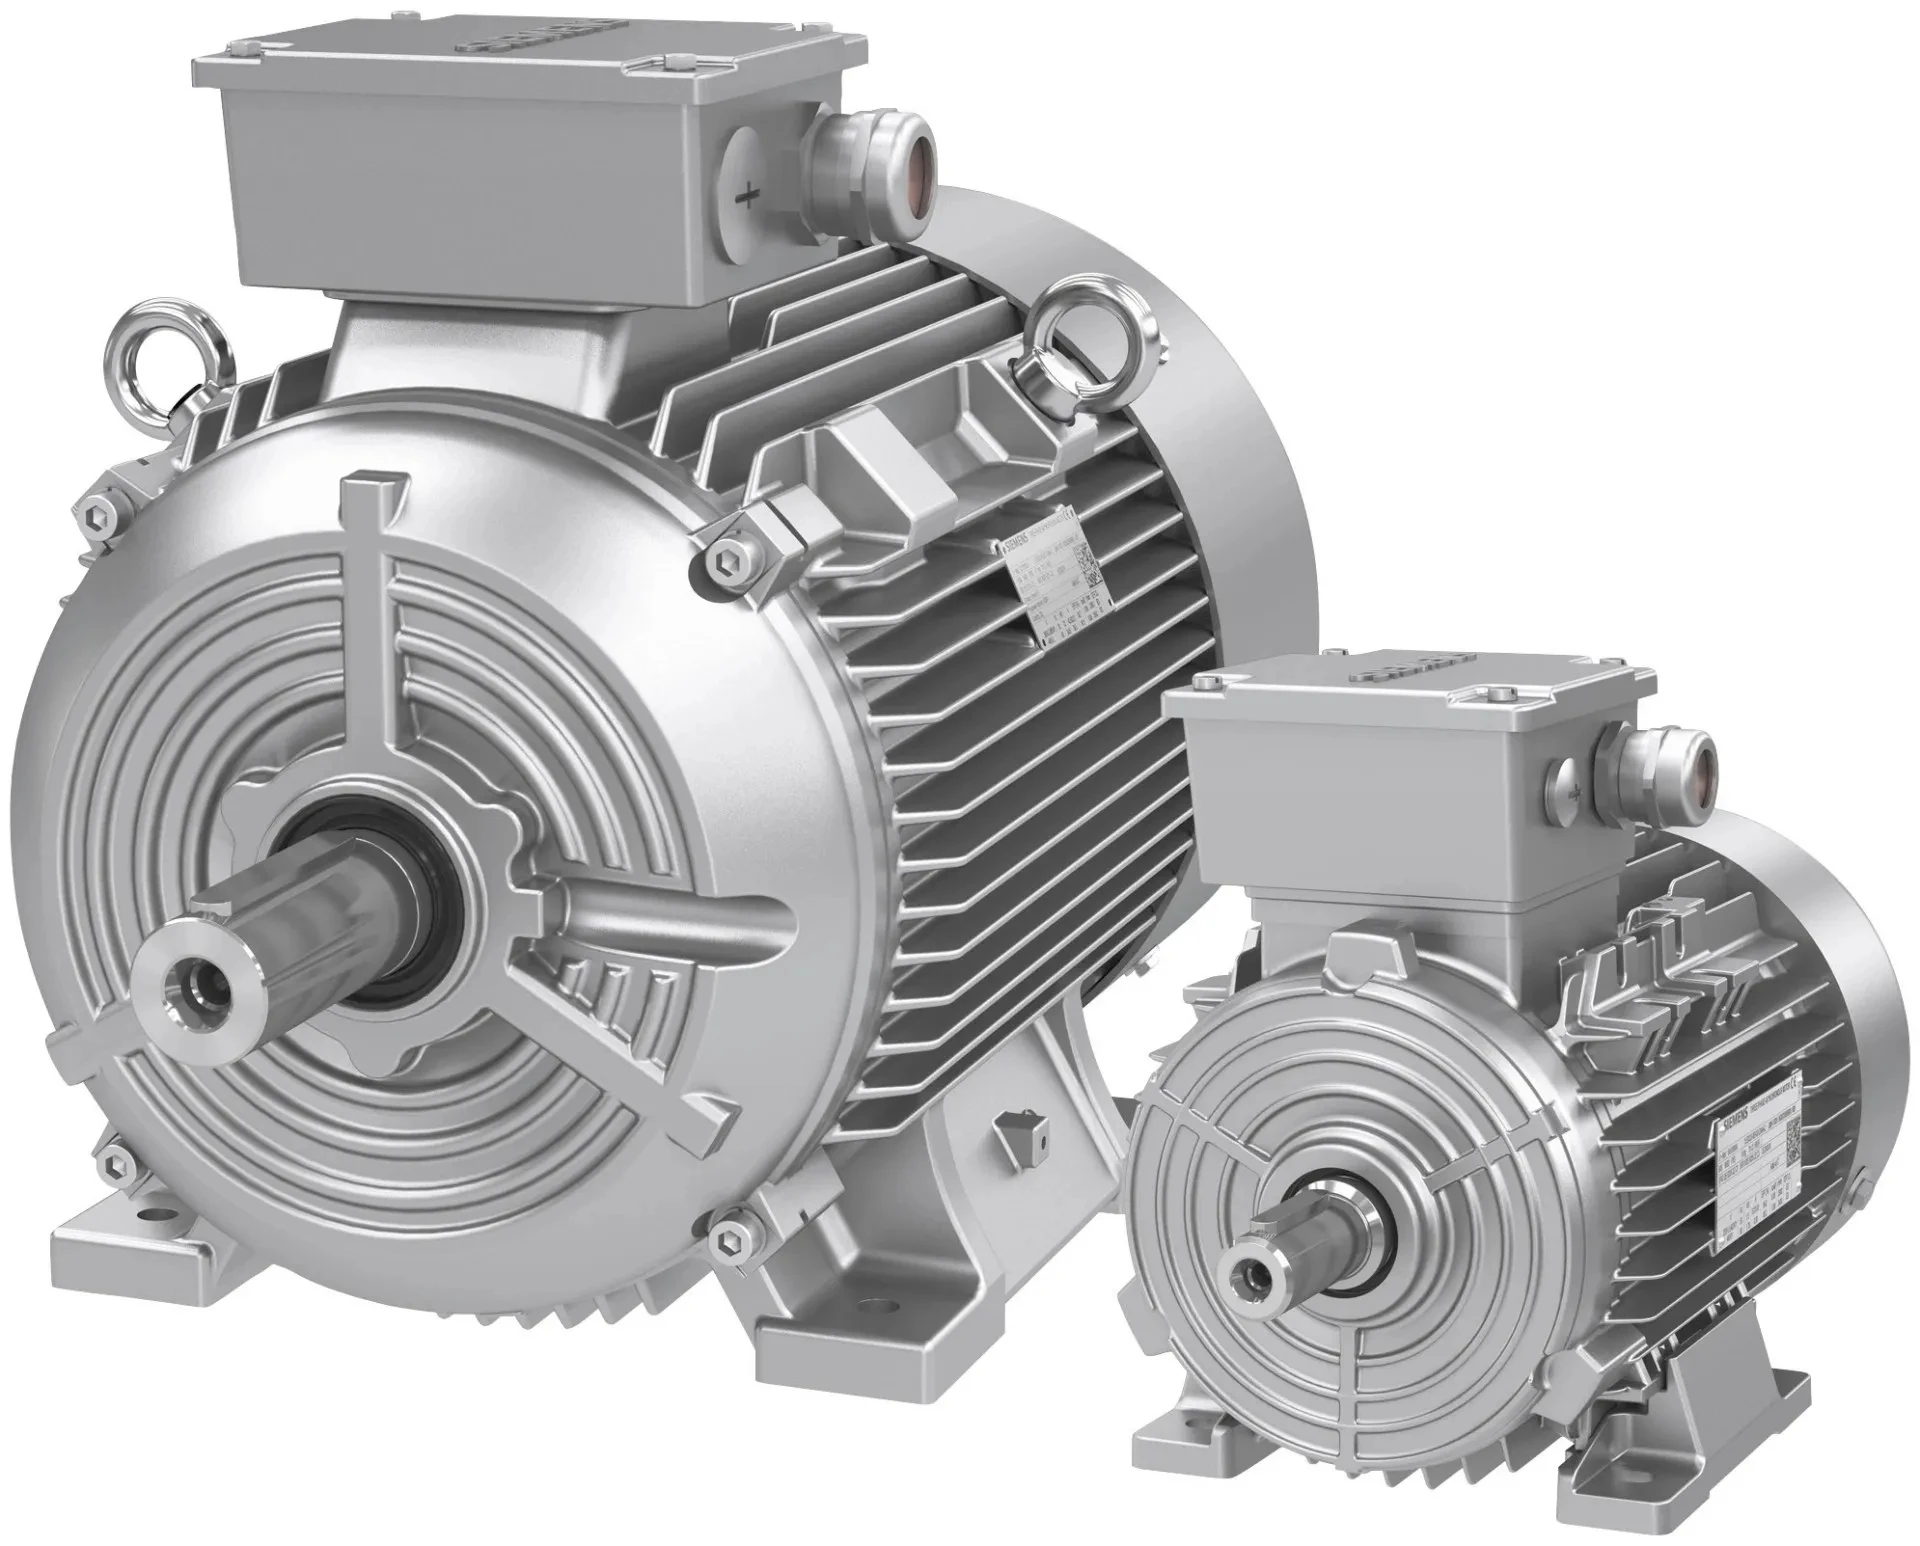 Siemens electric motor 230/380 AC Voltage and CE Certification